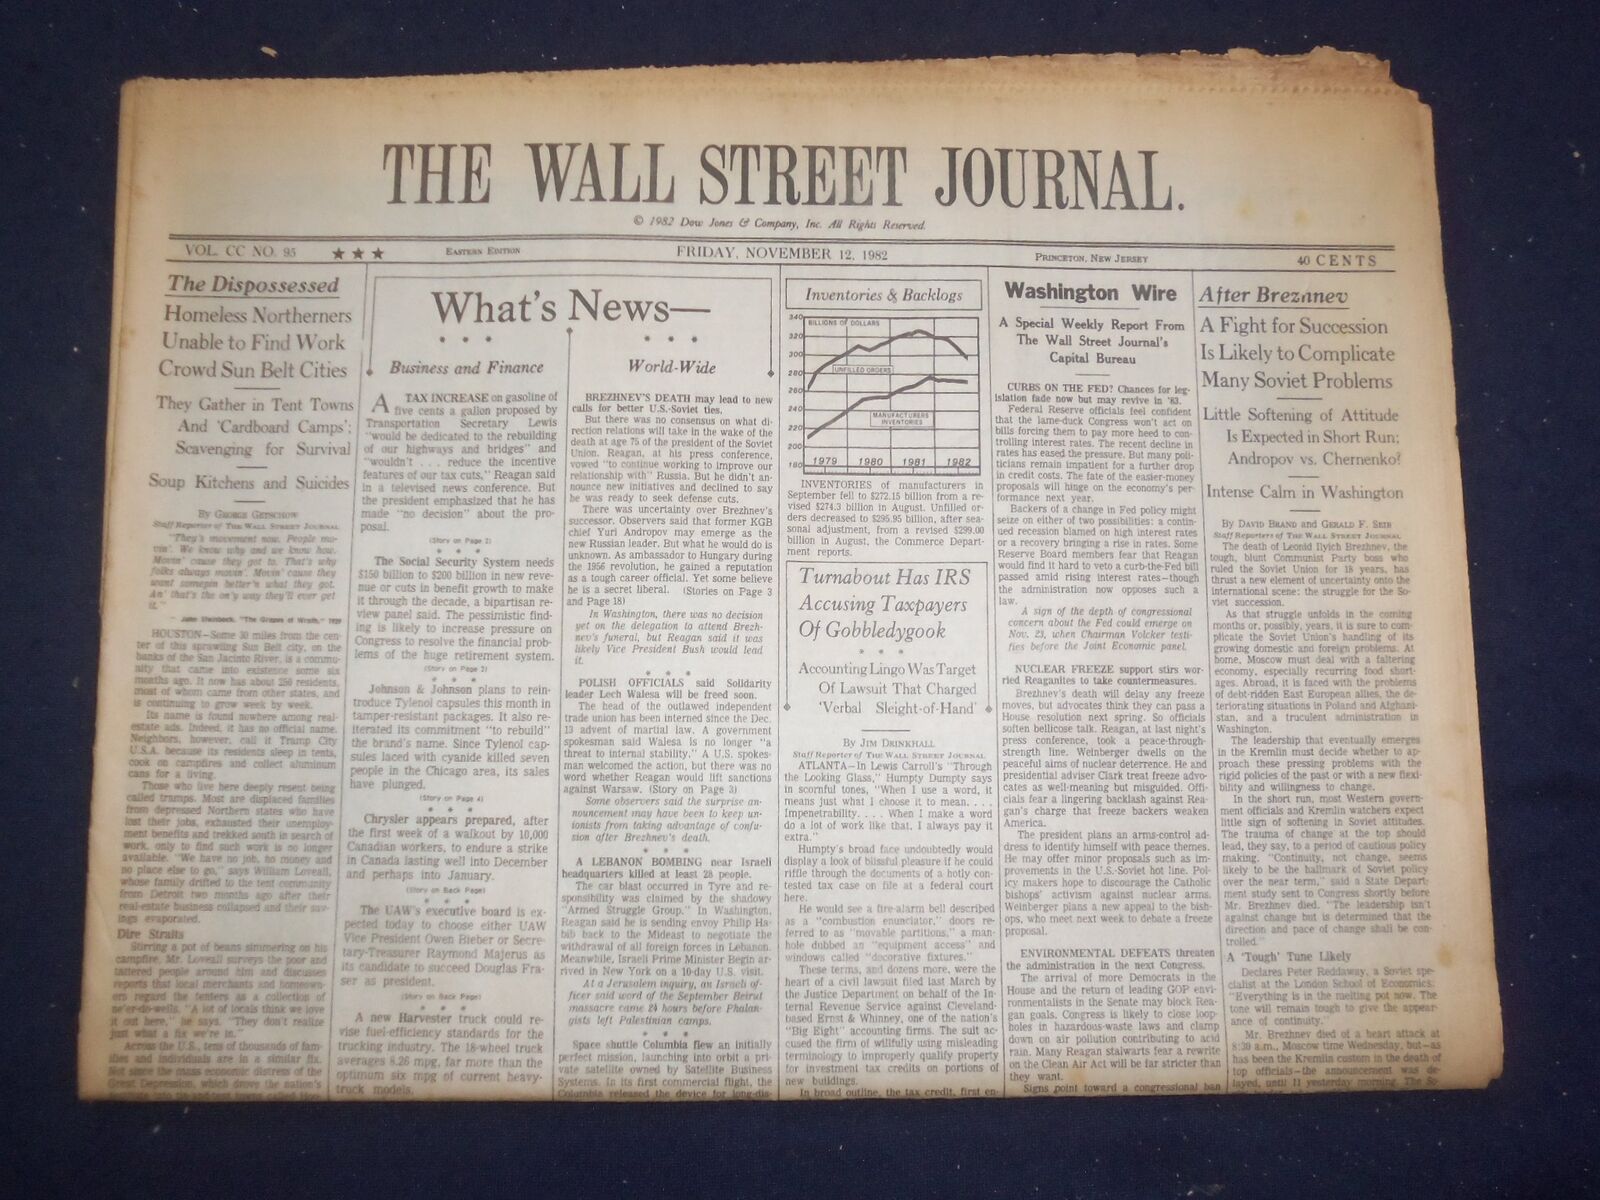 1982 NOV 12 THE WALL STREET JOURNAL - HOMELESS NORTHERNERS, NO WORK - WJ 379